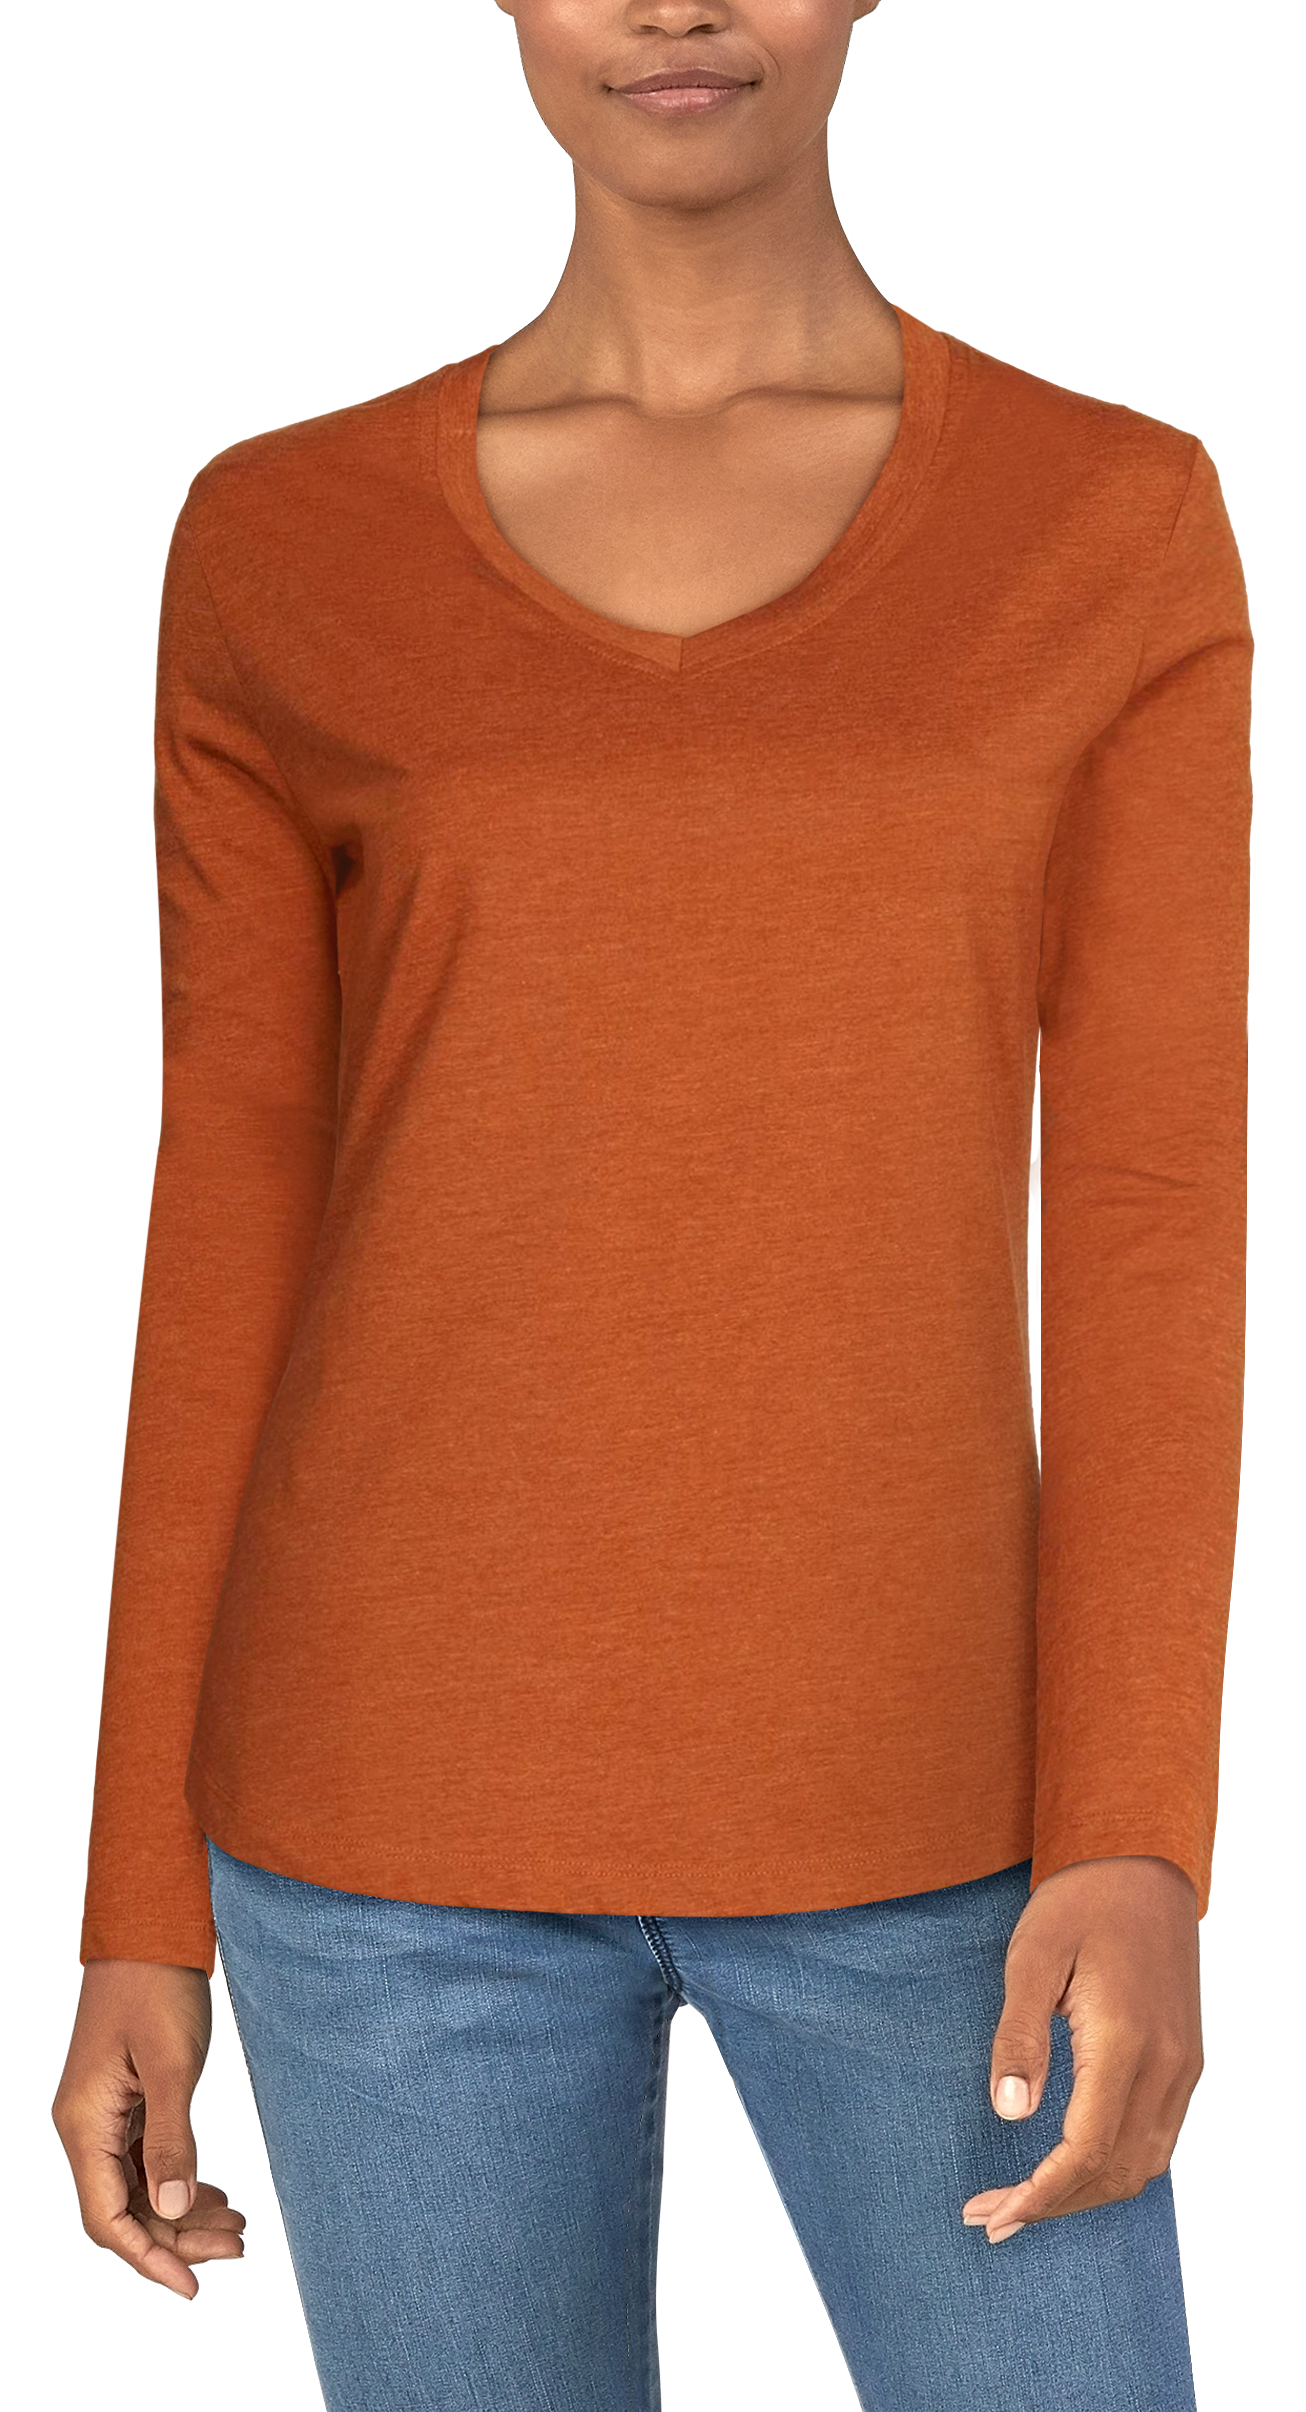 Natural Reflections Essential Long-Sleeve V-Neck T-Shirt for Ladies - Caramel Cafe - S